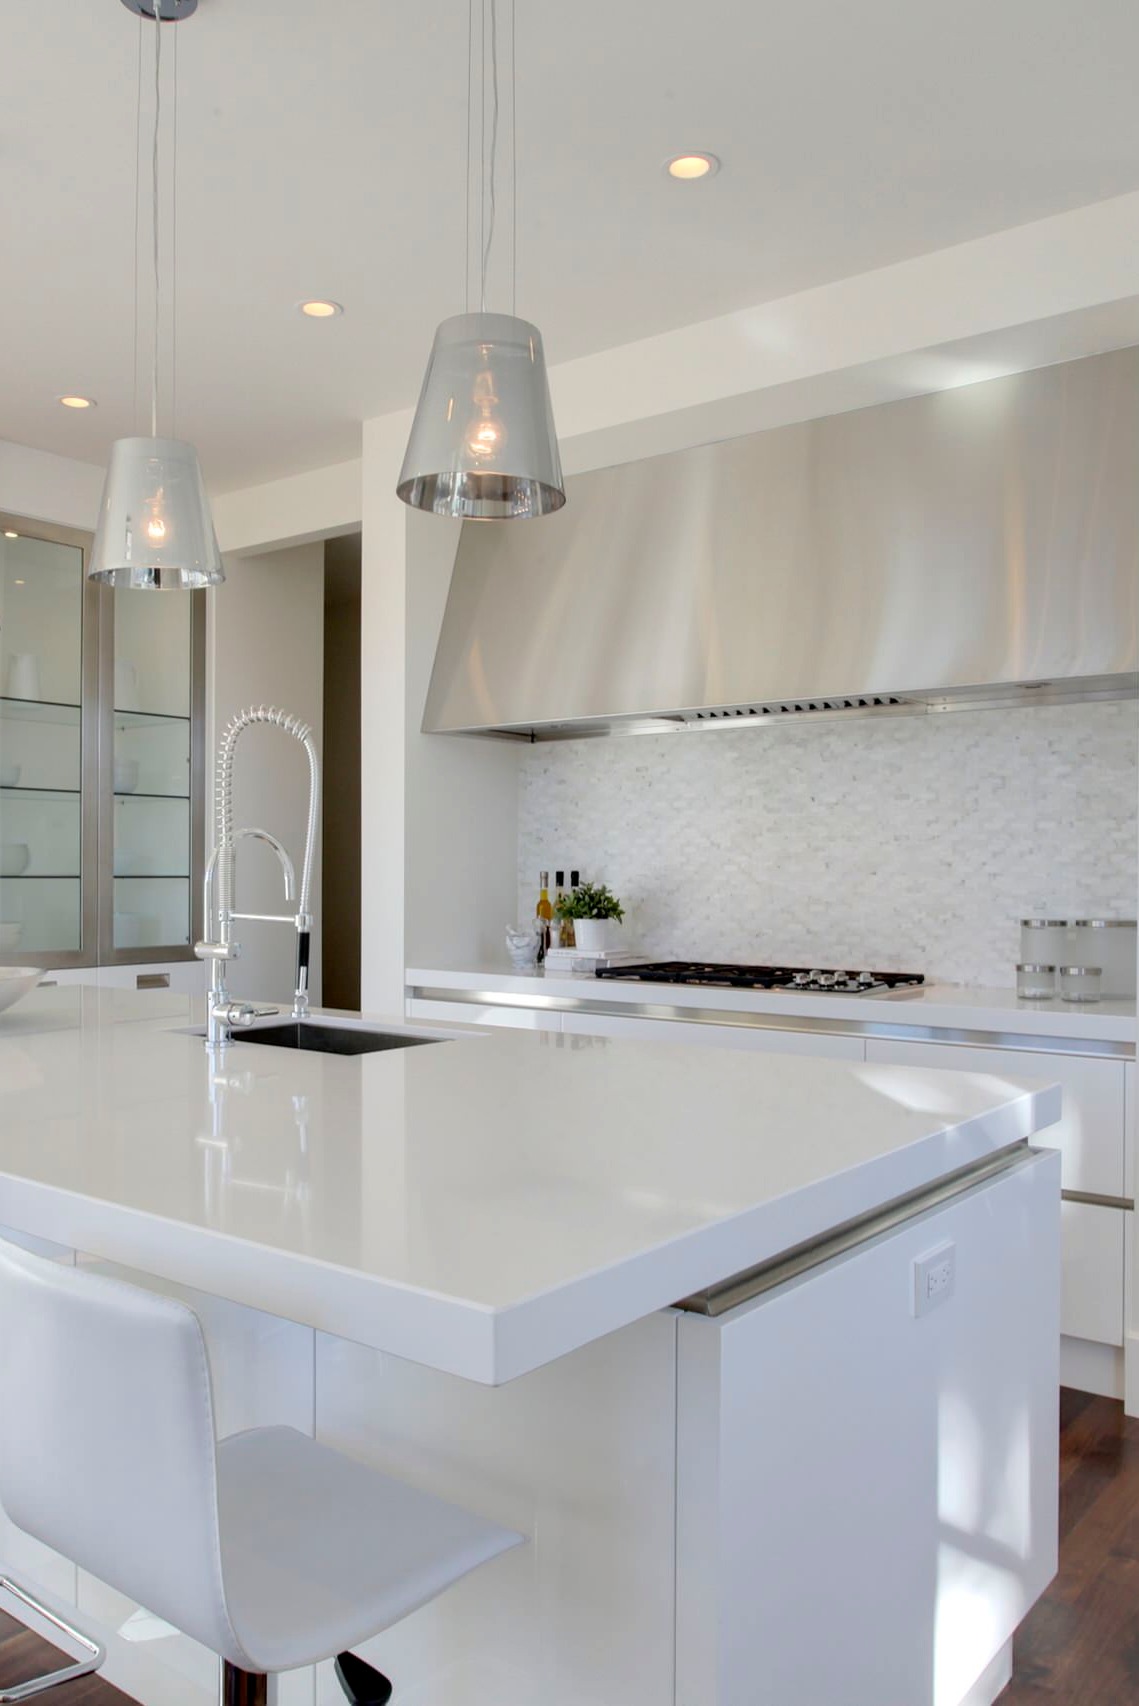  Countertops For White Kitchen Cabinets with Simple Decor